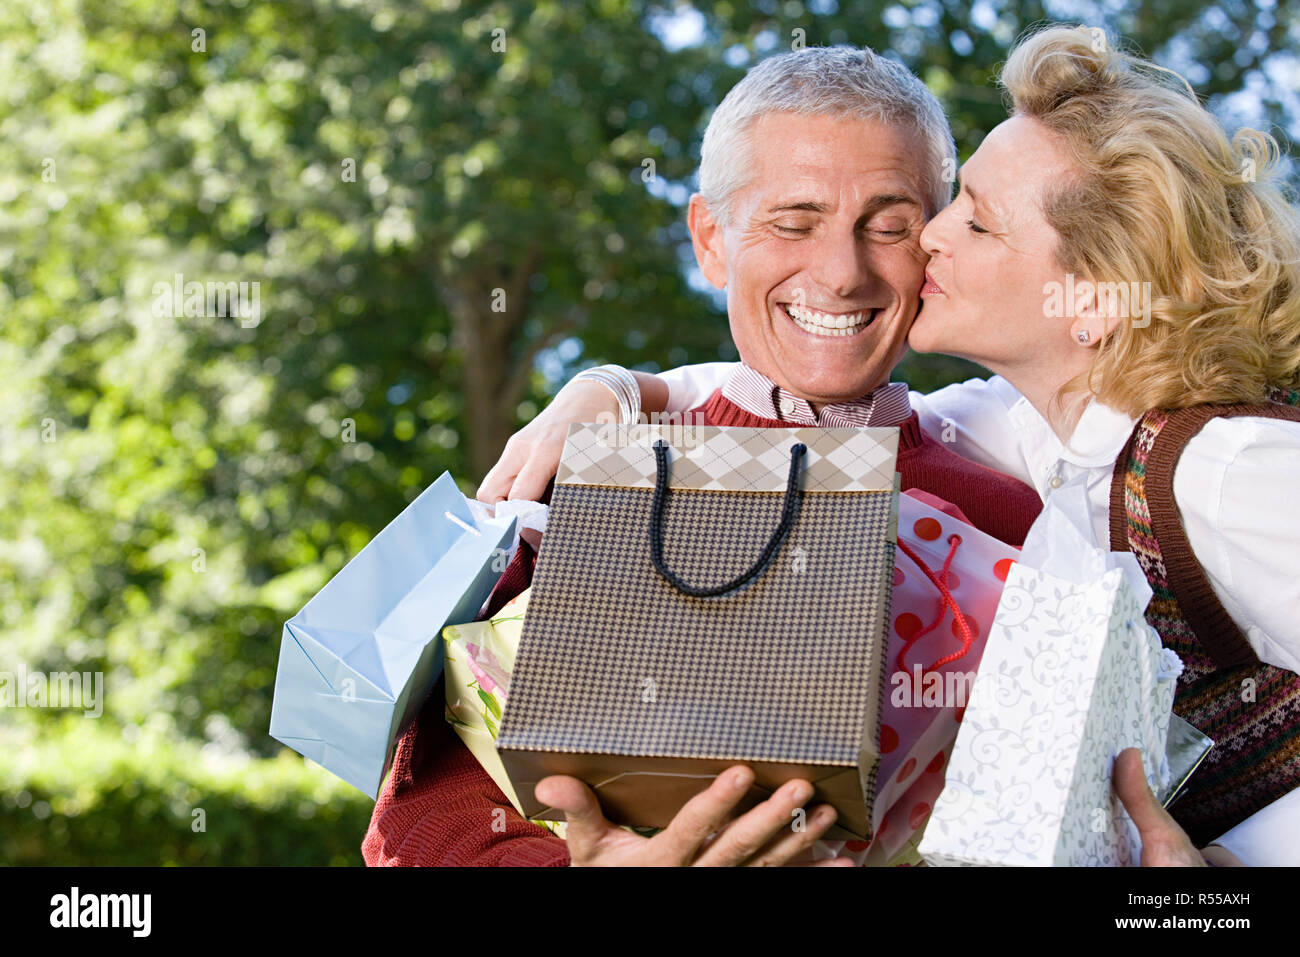 Wife kissing husband with bags of gifts Stock Photo